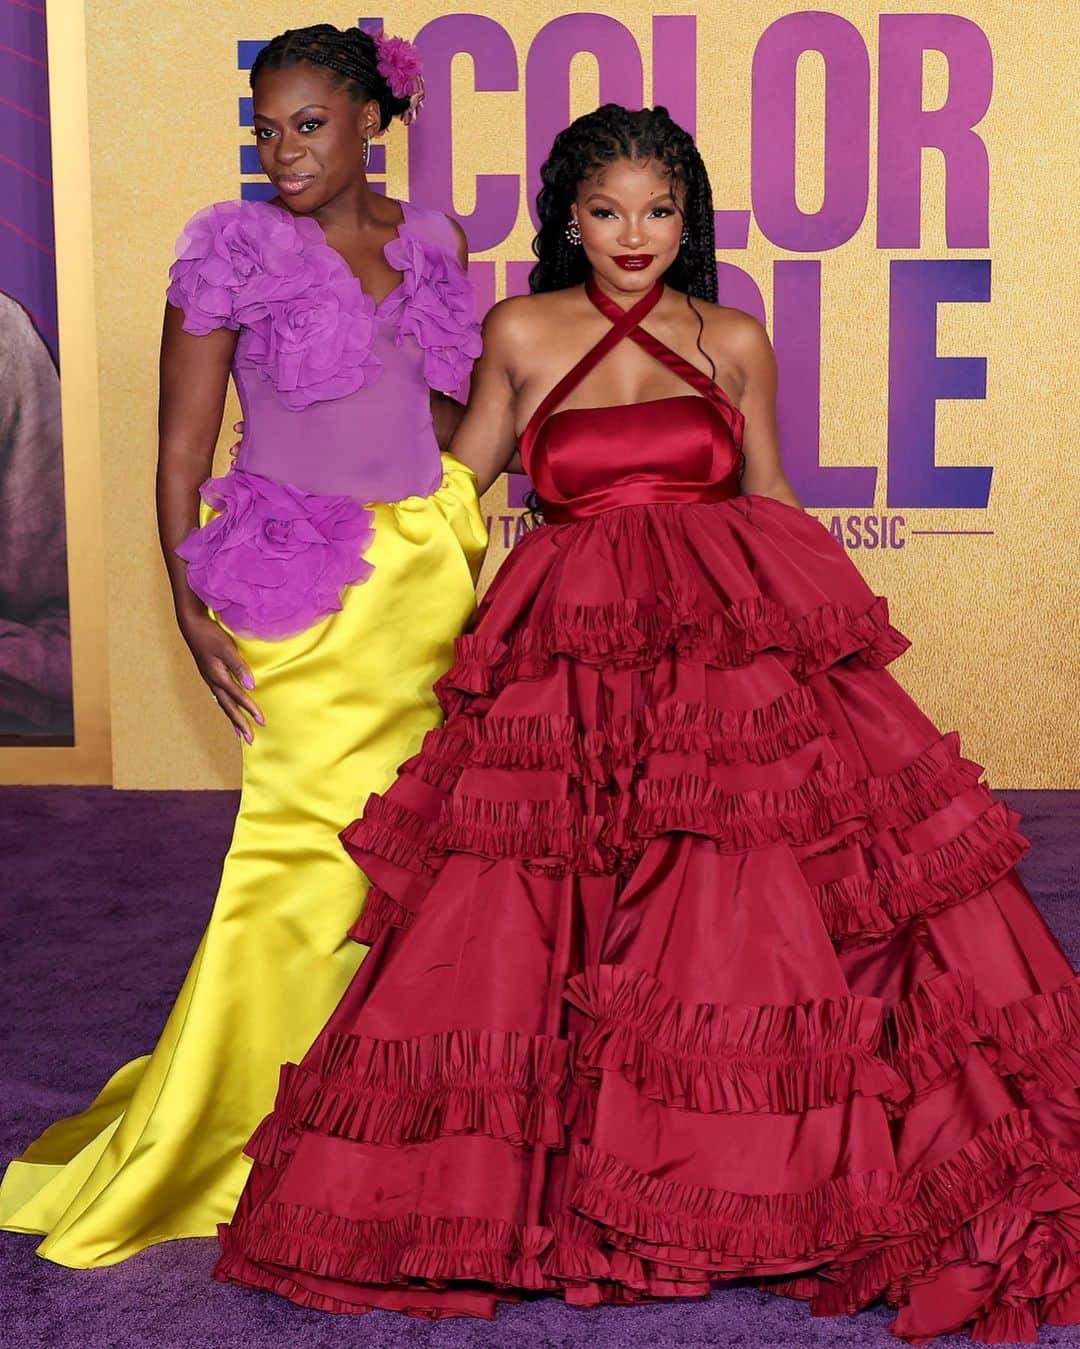 Just Jaredのインスタグラム：「Halle Bailey and her co-star Phylicia Pearl Mpasi pose together at the premiere for their upcoming movie “The Color Purple.” Halle’s sister Chloe Bailey was also seen at the event! #HalleBailey #PhyliciaPearlMpasi #ChloeBailey Photos: Getty」